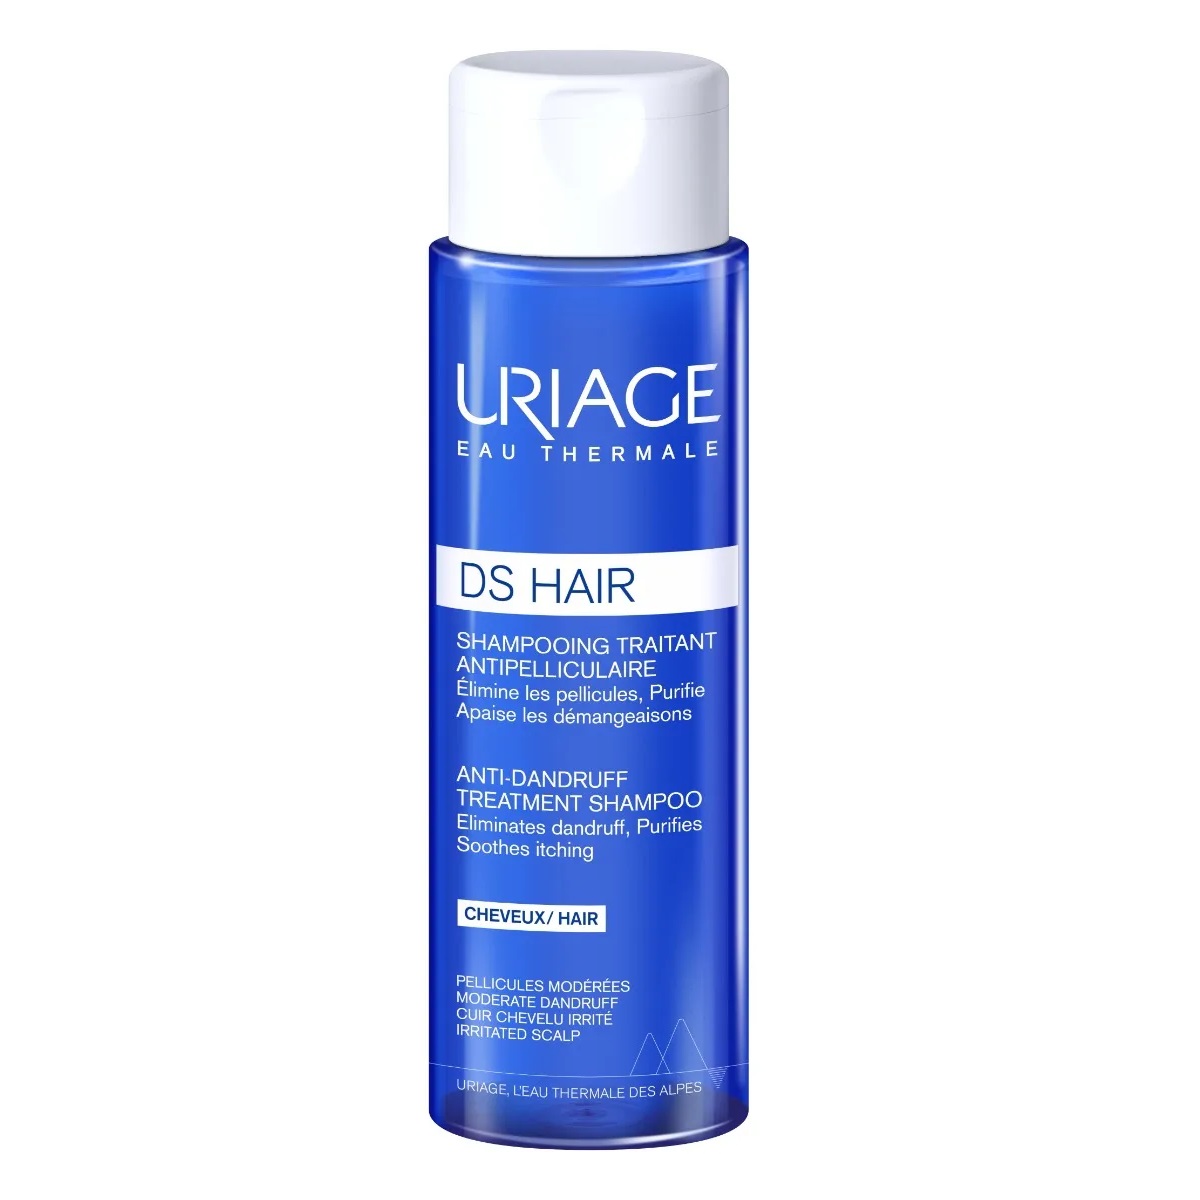 uriage ds hair shampooing traitant antipelliculaire 200ml 3661434009303